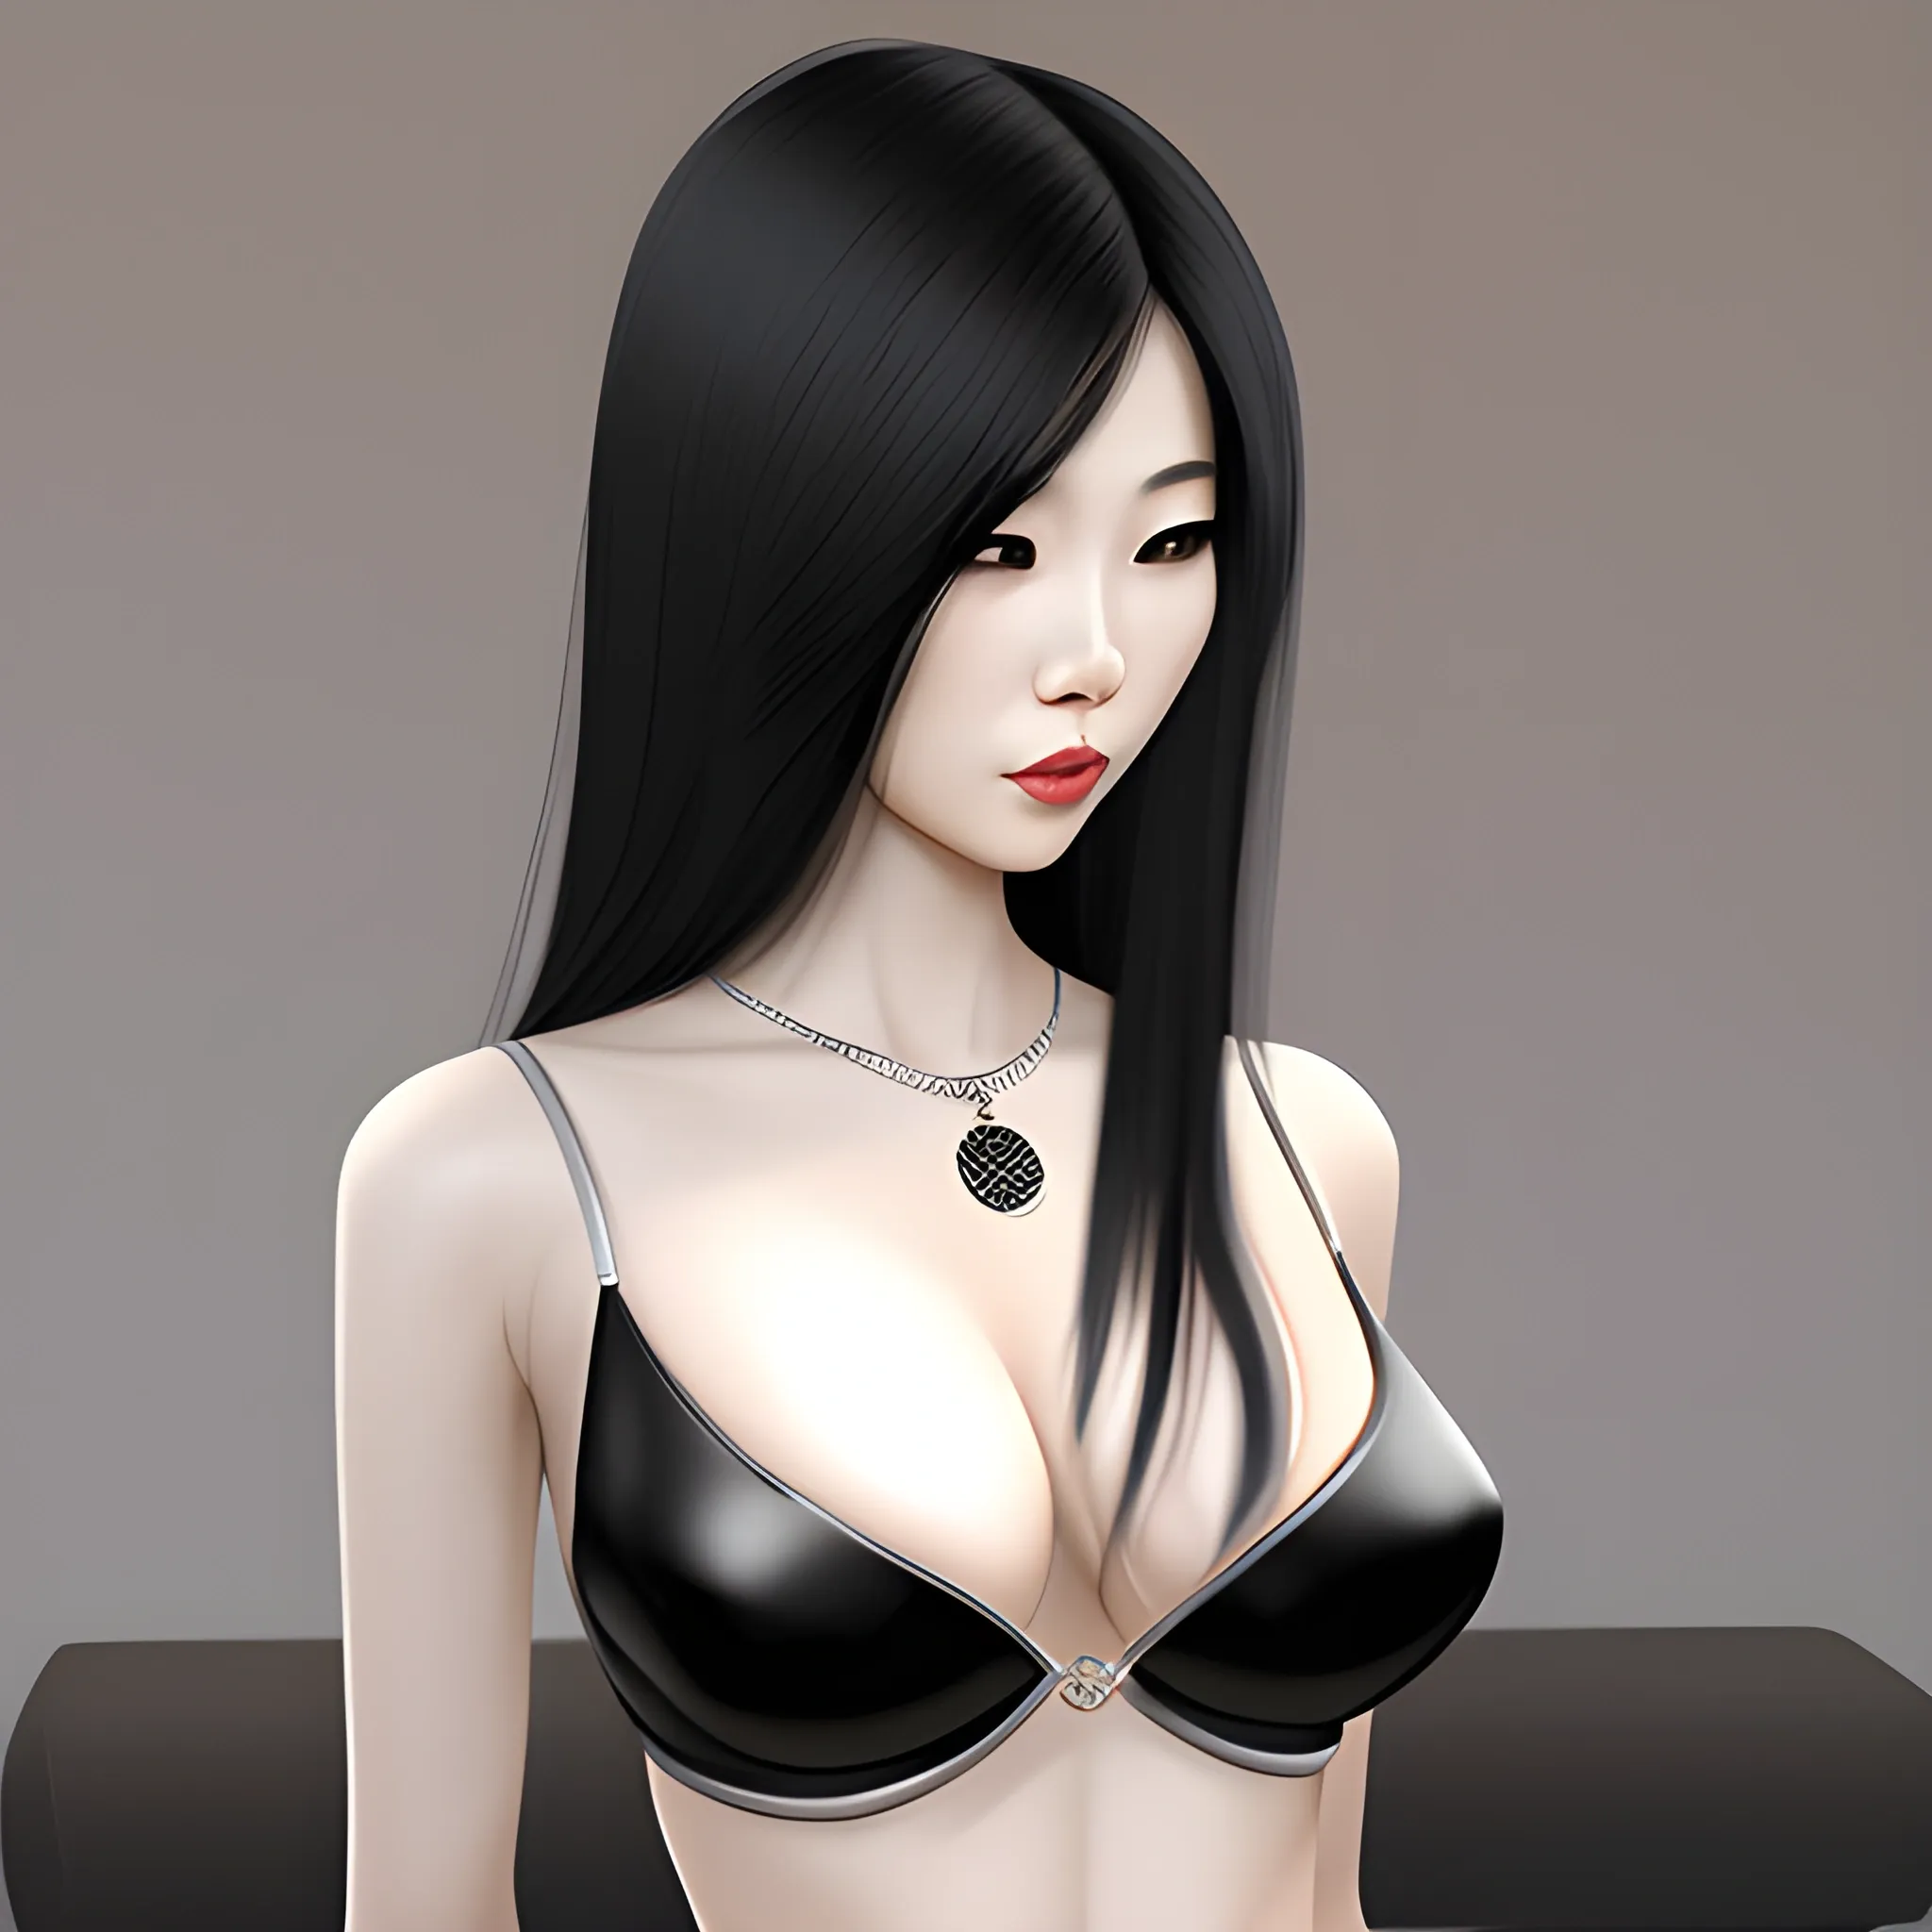 woman, asian factions, black straight hair, D cup breast, six pa 